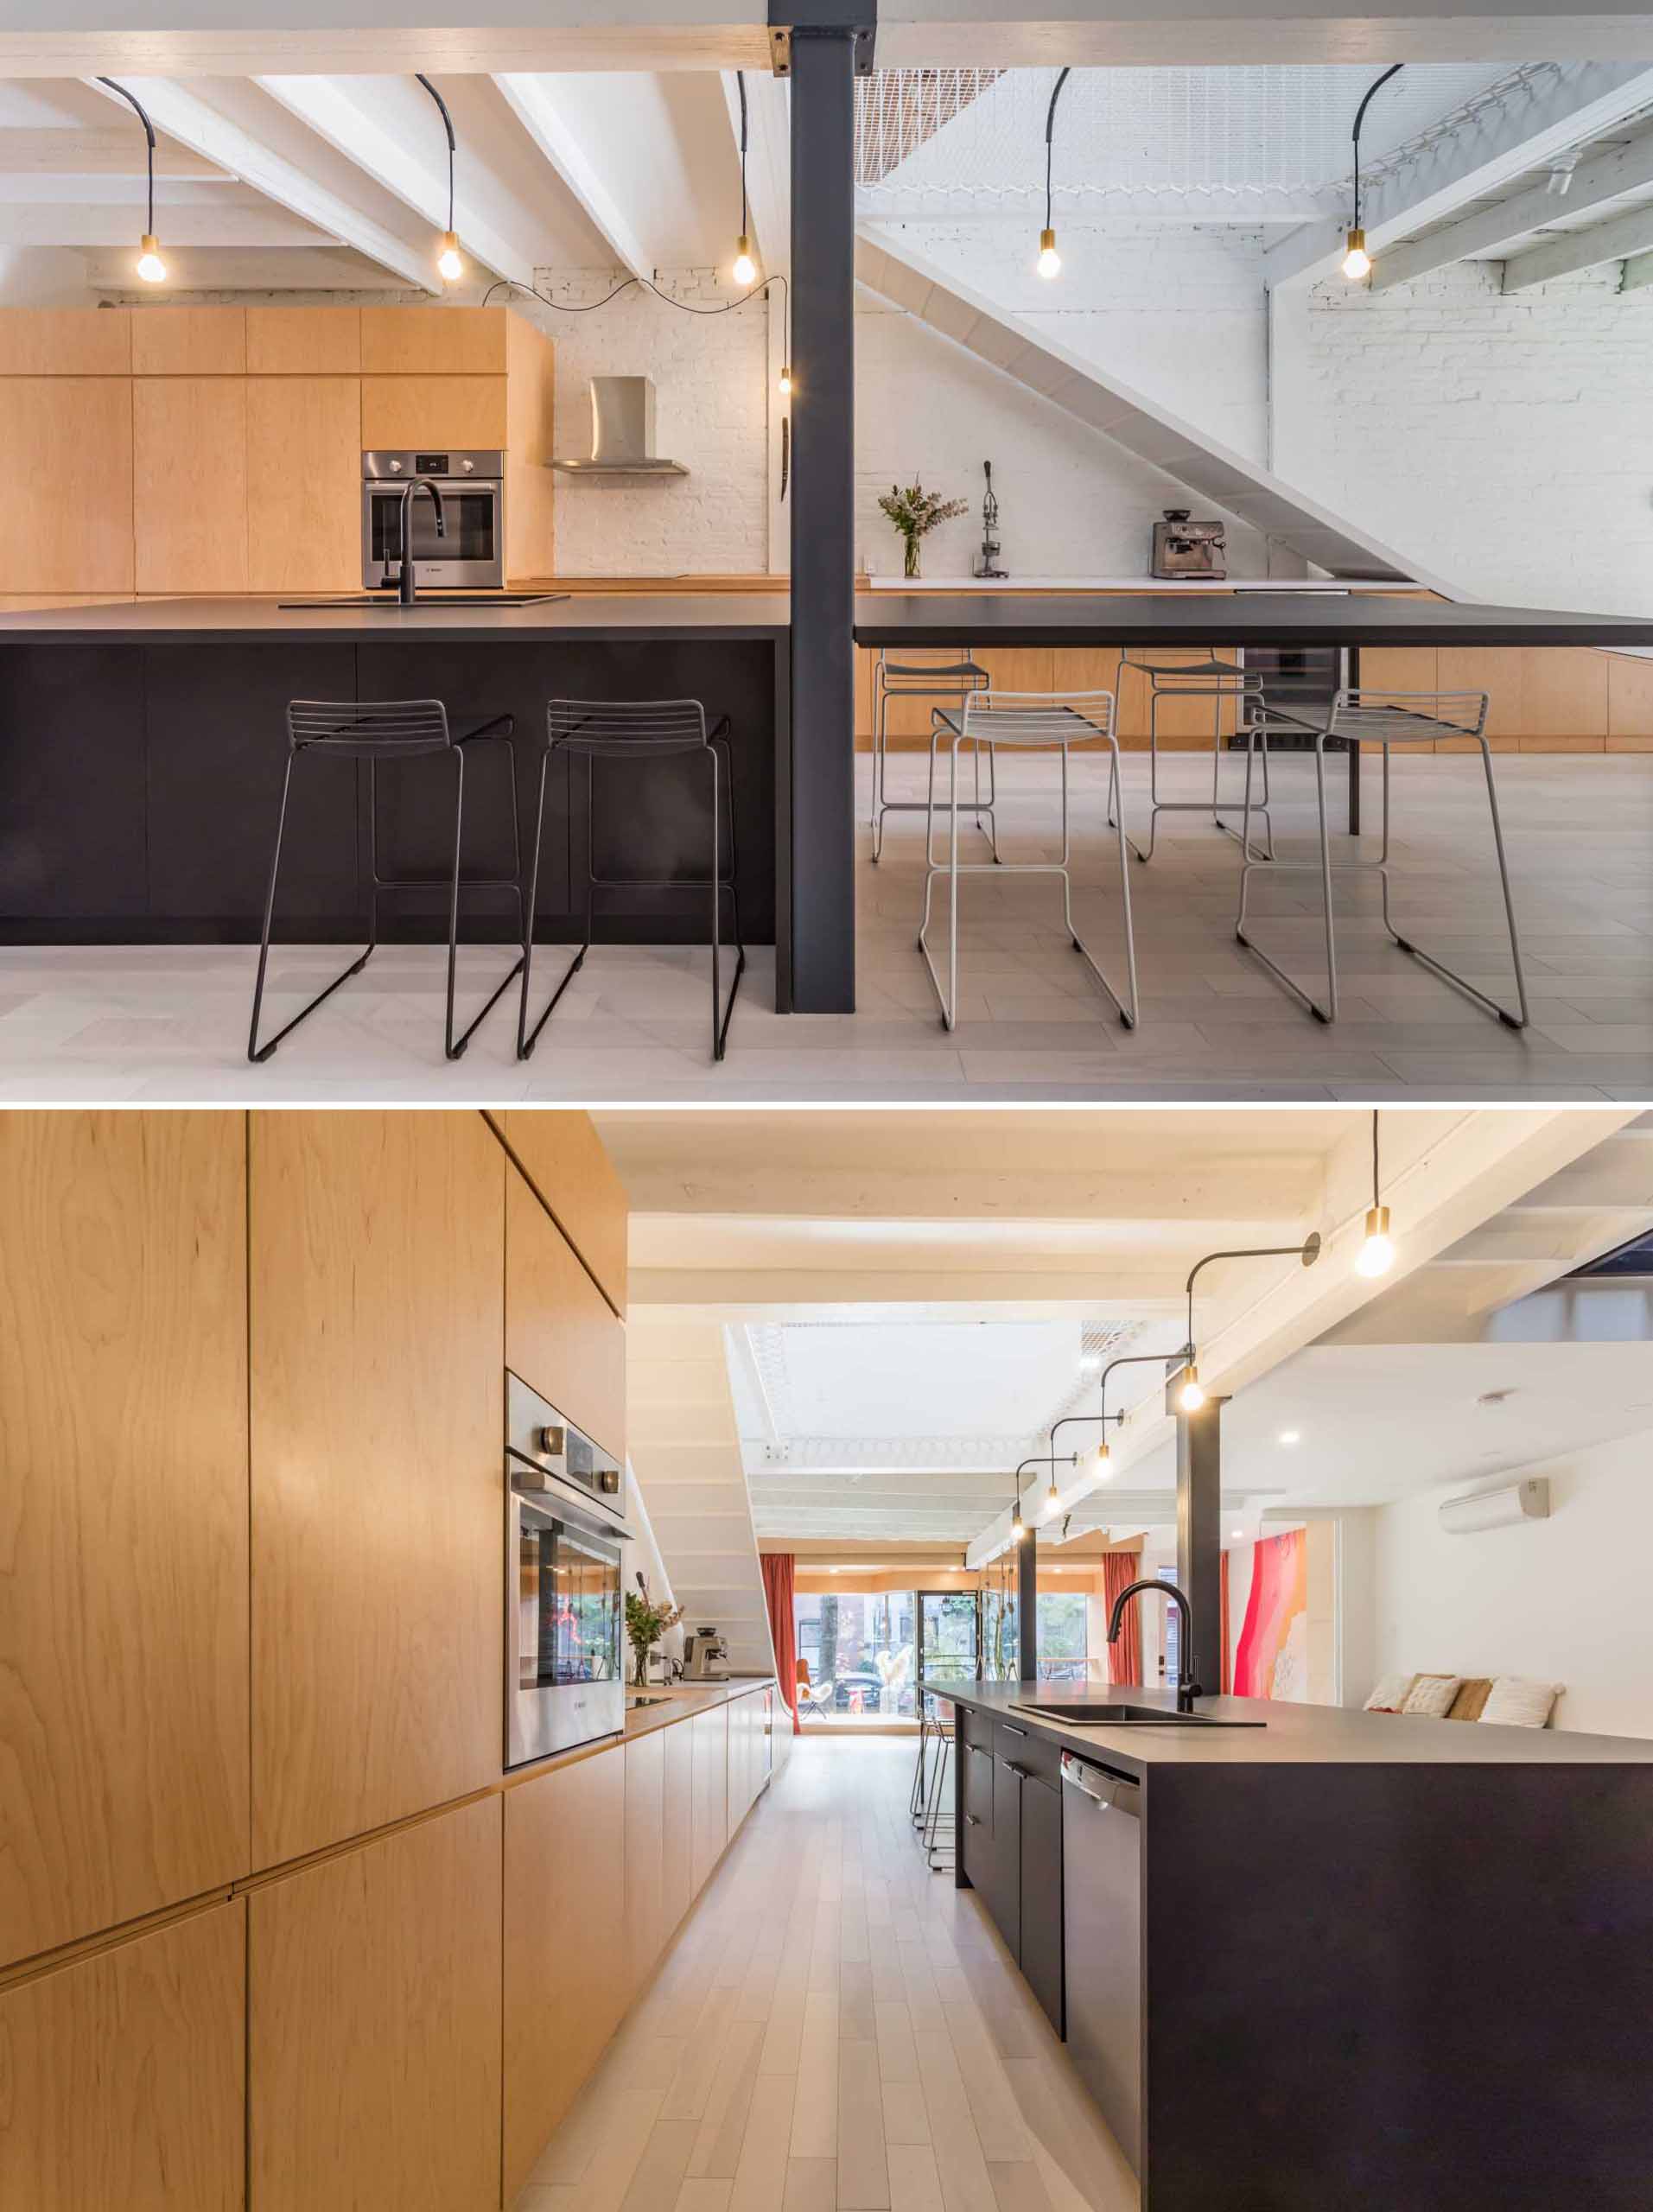 The open-plan interior of the social areas of the home also includes the dining area and kitchen, where wood and black cabinetry and countertops have been paired for a contemporary appearance.